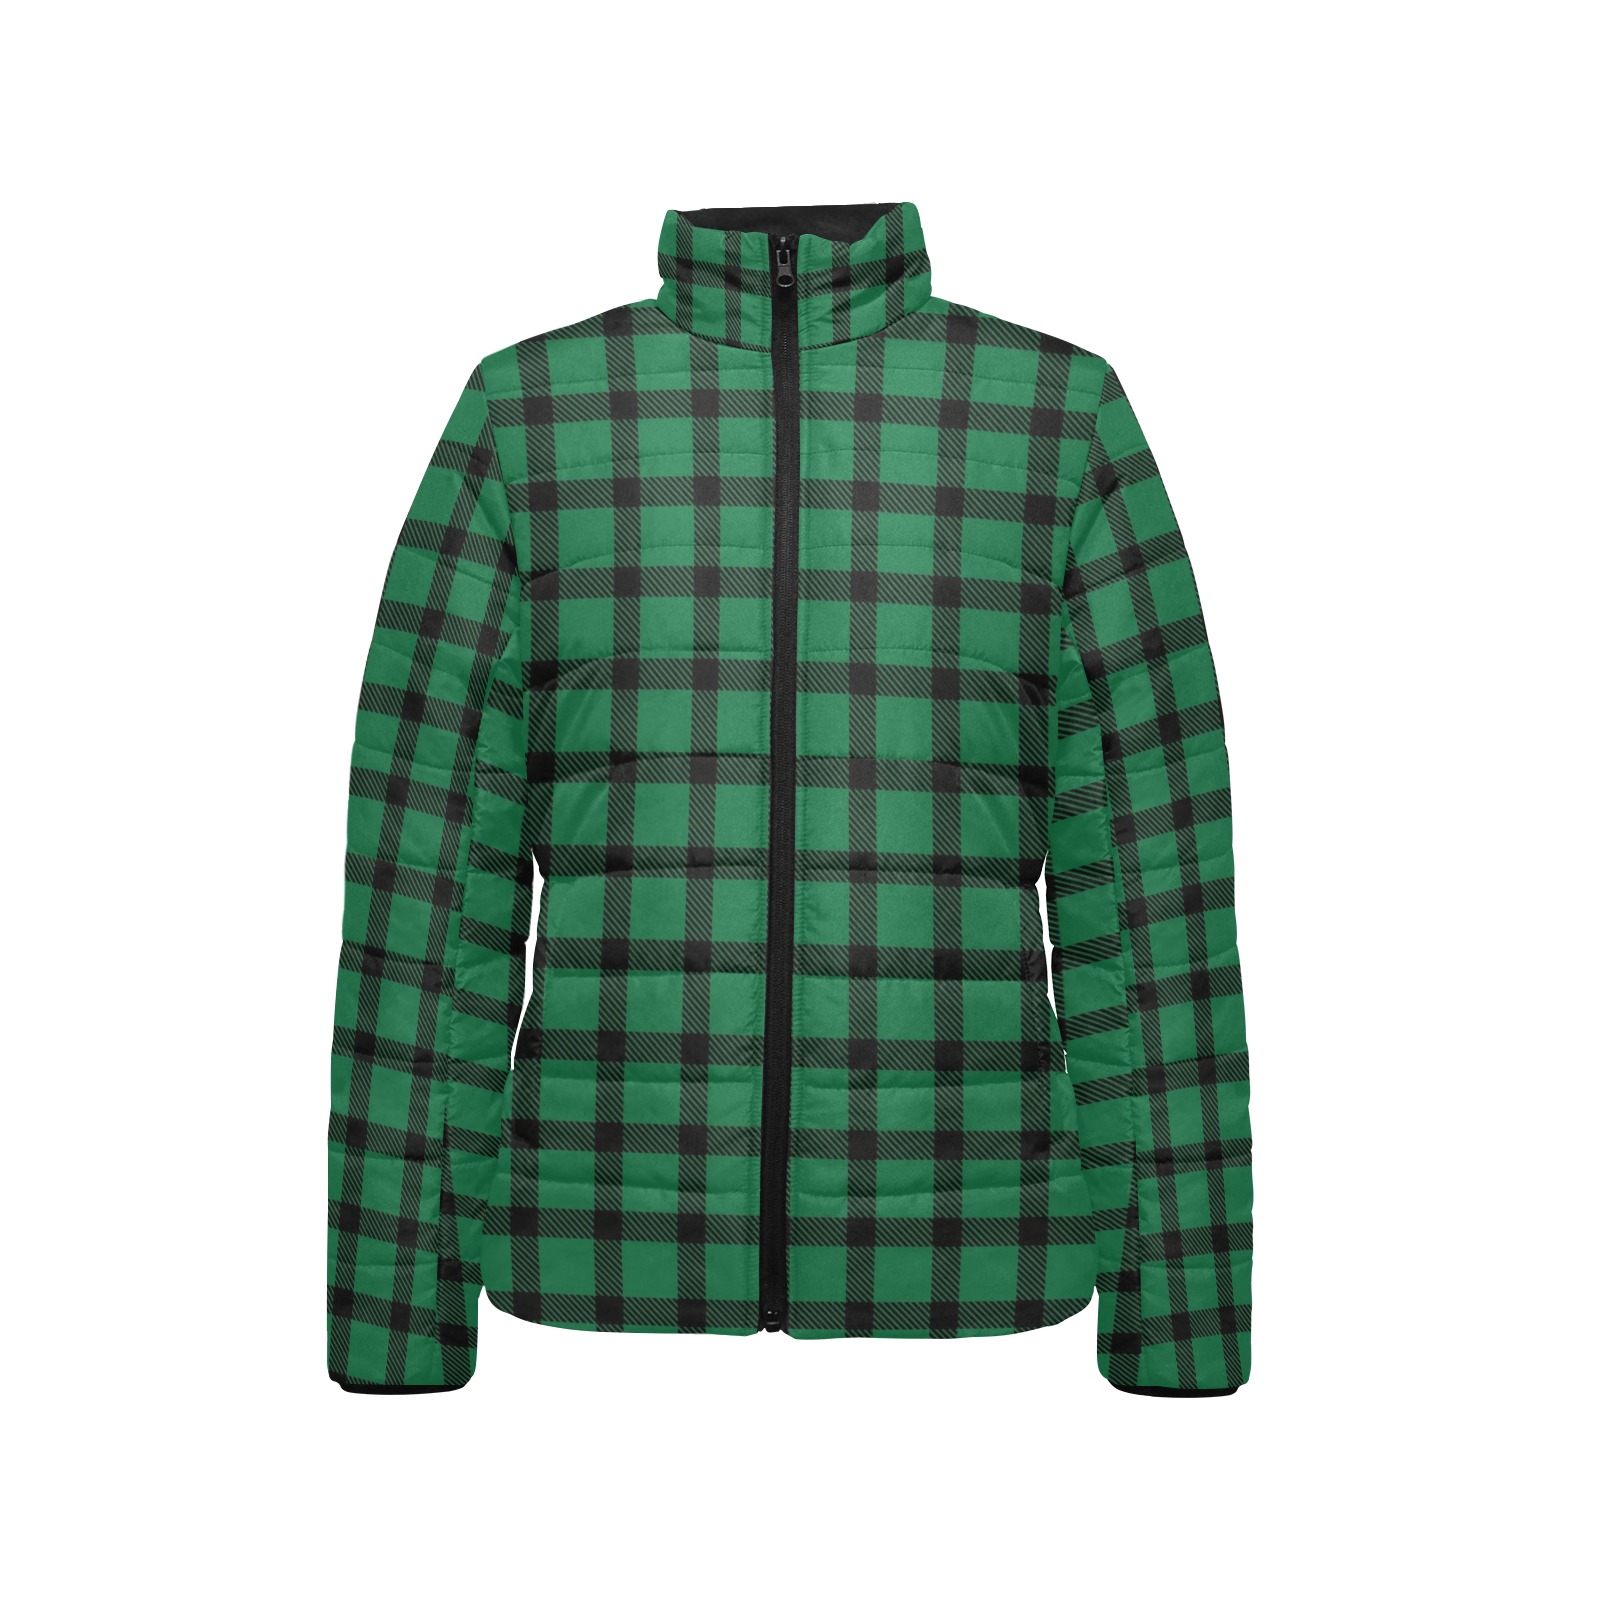 Green and Black Plaid Women's Stand Collar Padded Jacket (Model H41)